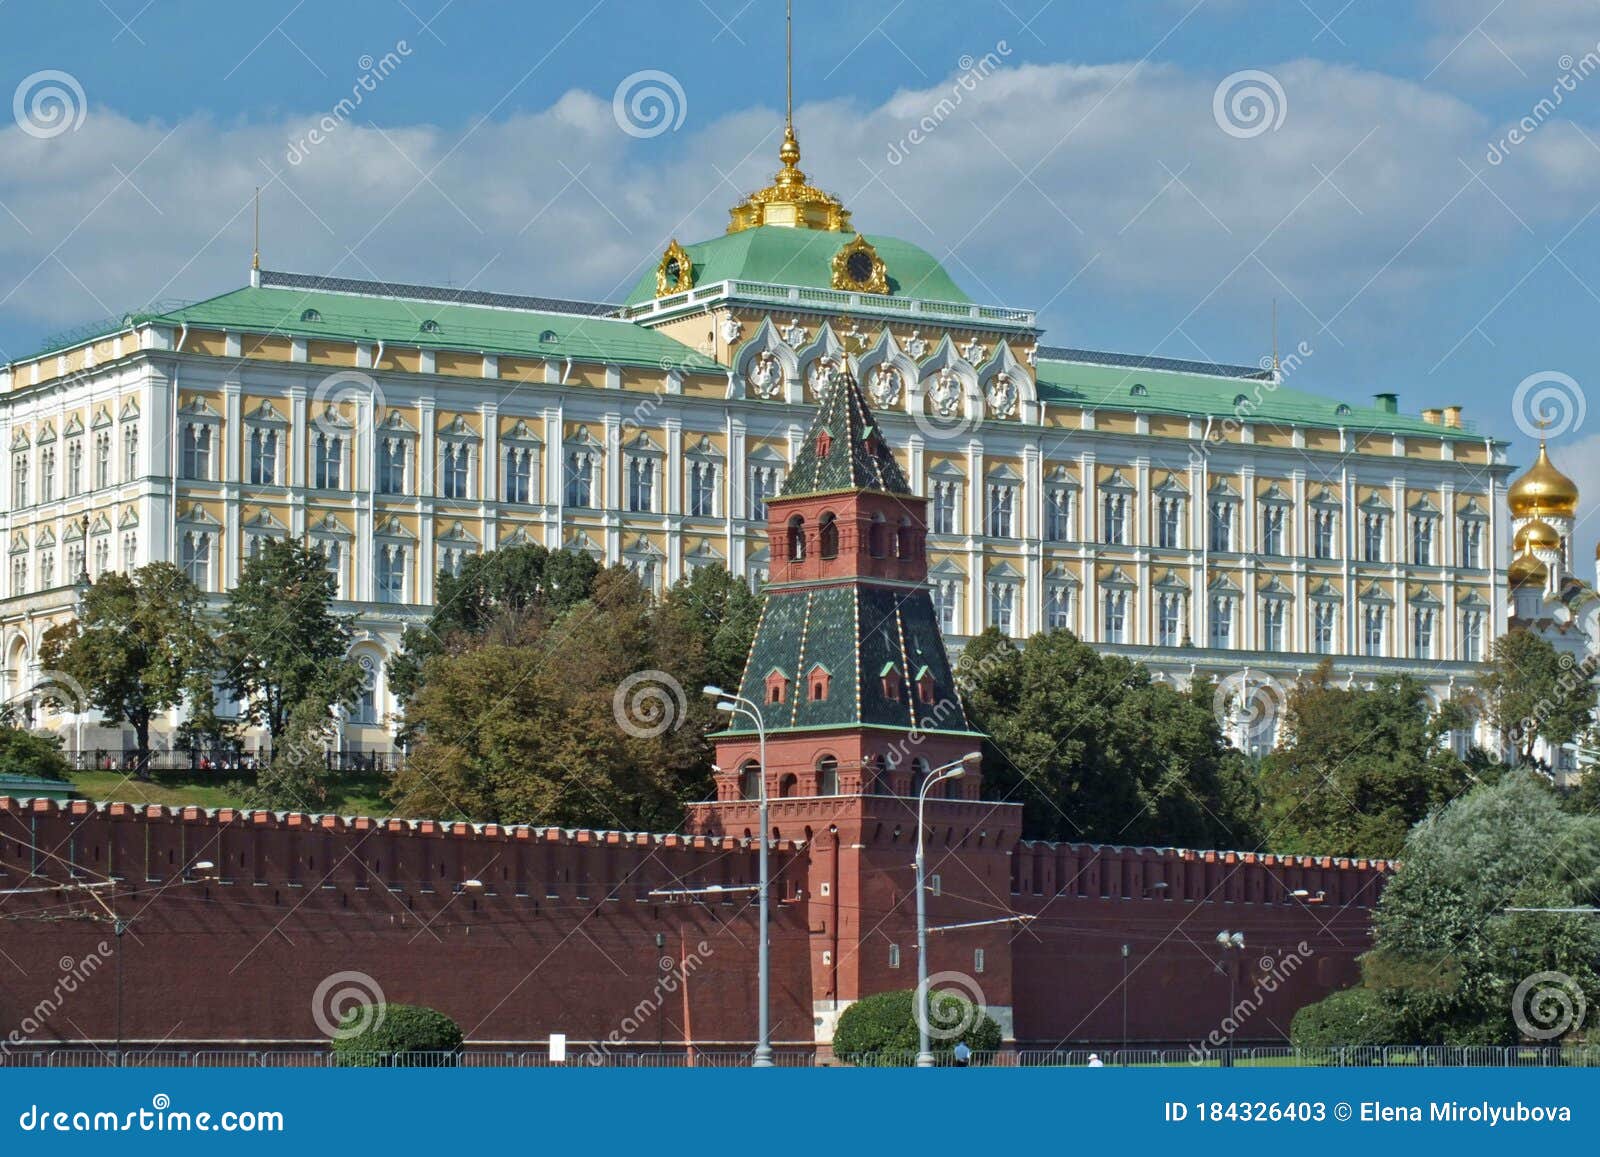 close view of kremlin wall with tower and cathedral photo made from opposite bank of the river moscow